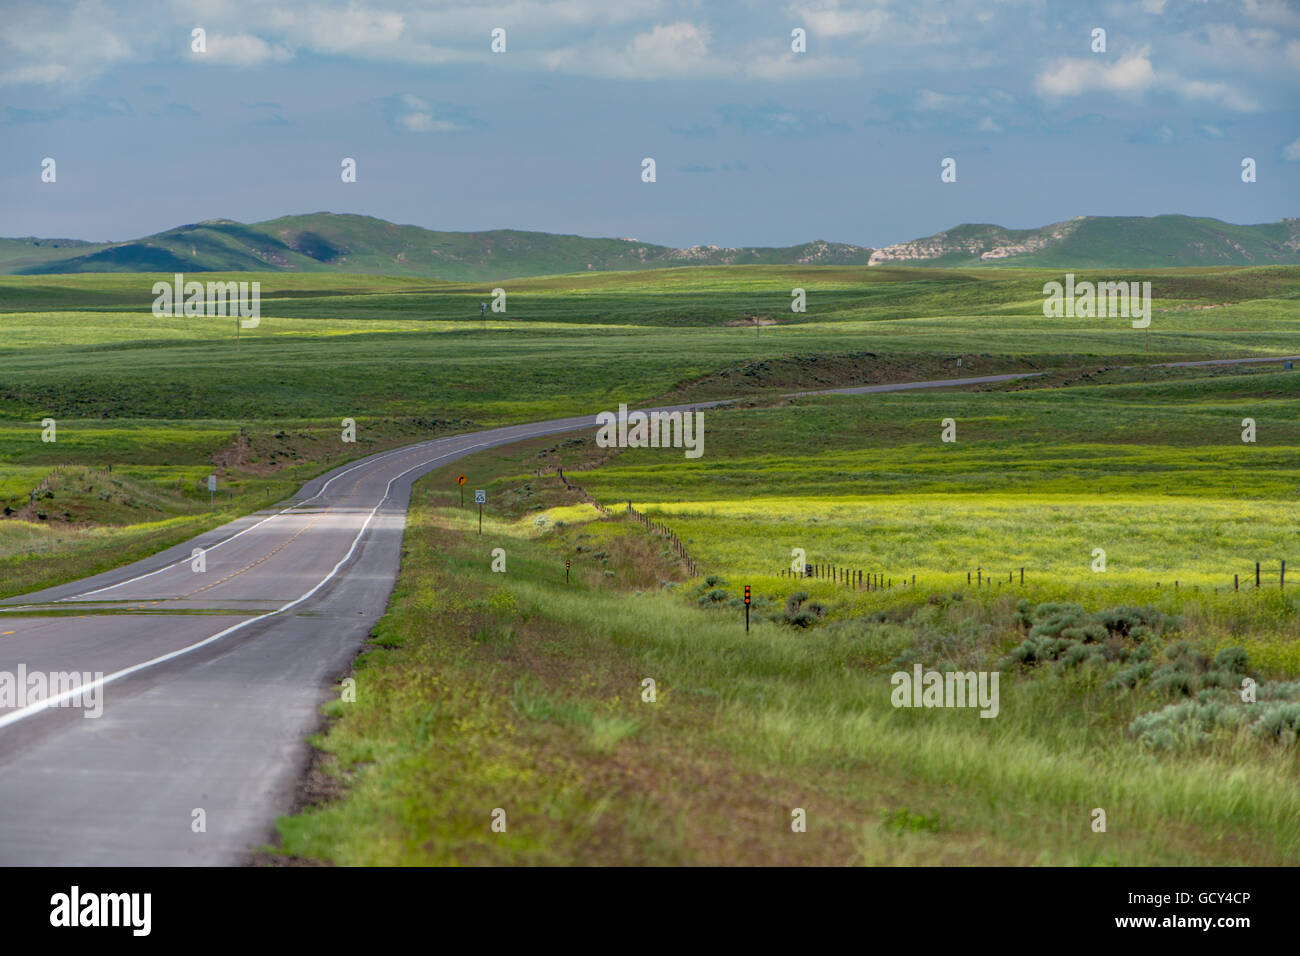 A rural highway leads into the distance. Stock Photo